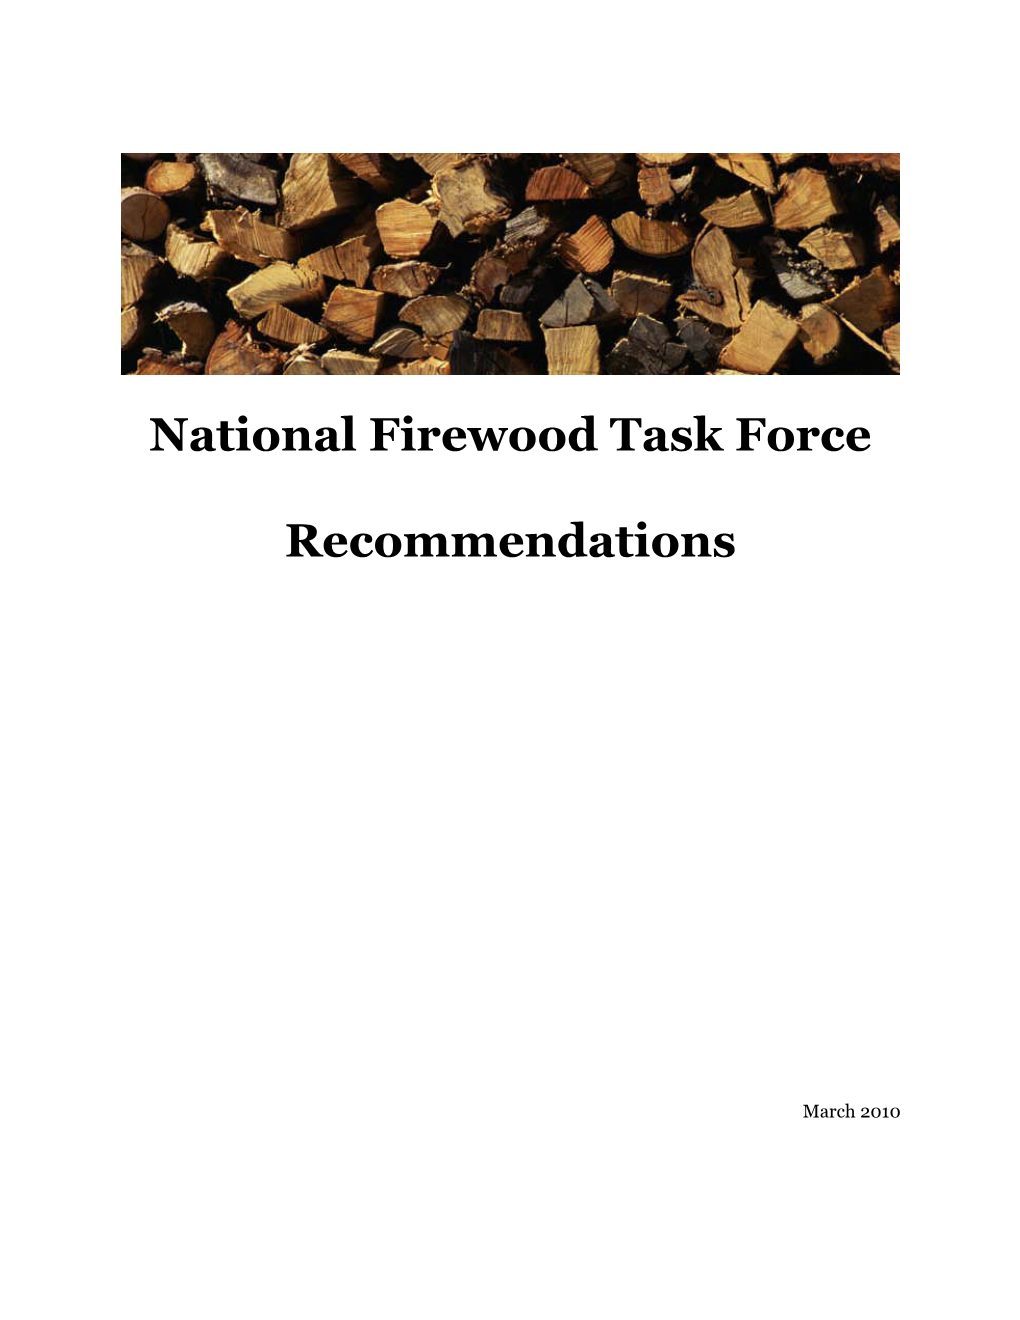 National Firewood Task Force Recommendations